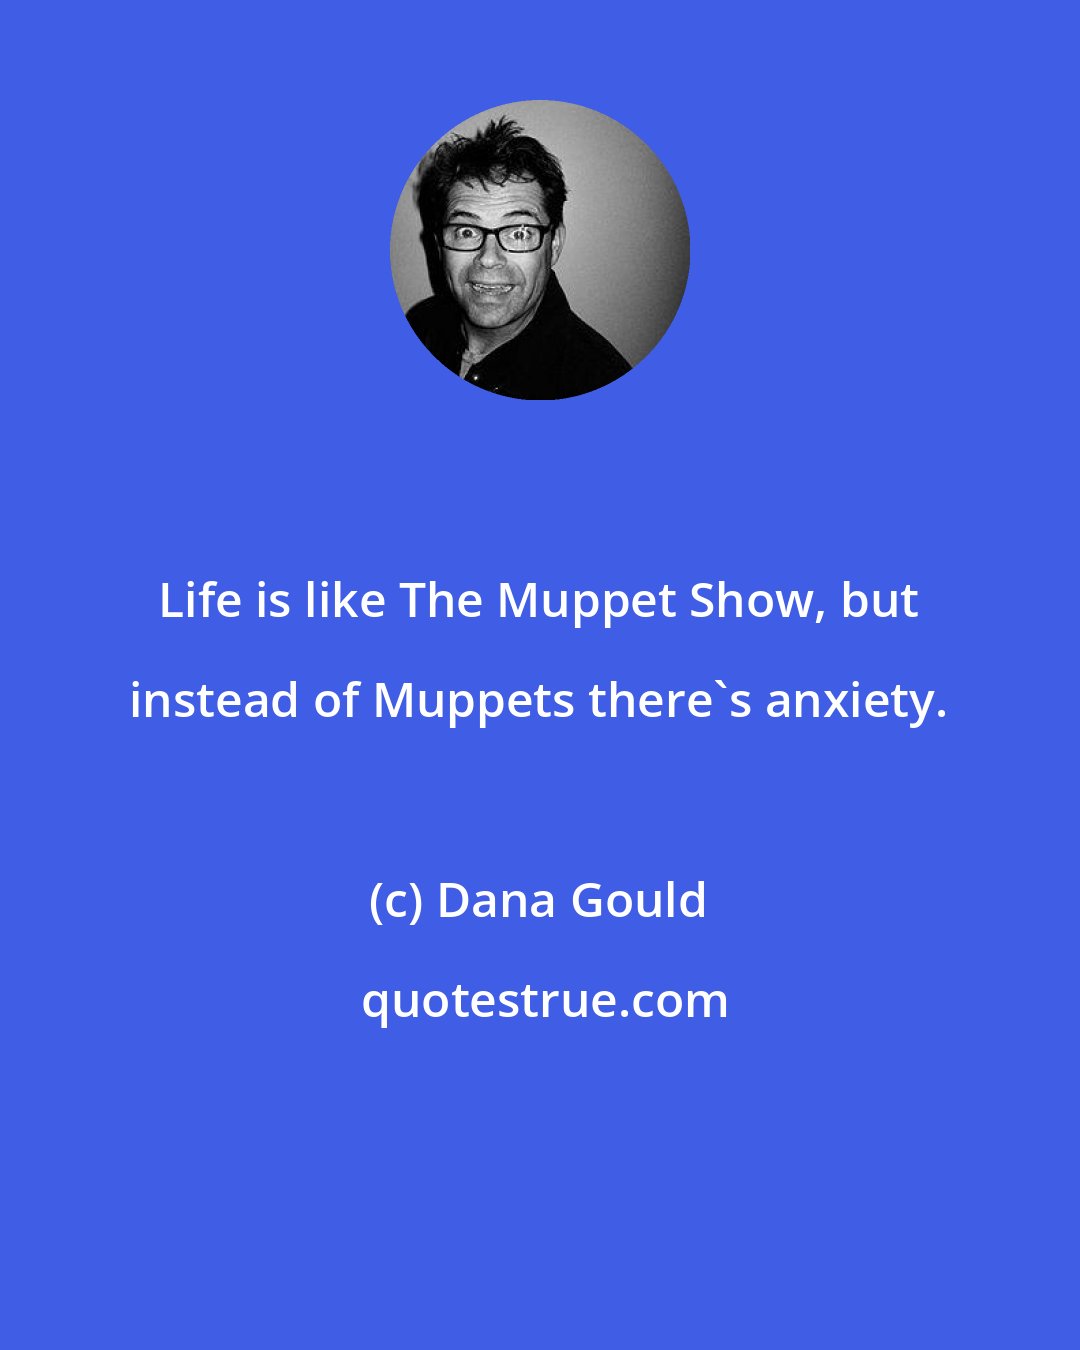 Dana Gould: Life is like The Muppet Show, but instead of Muppets there's anxiety.